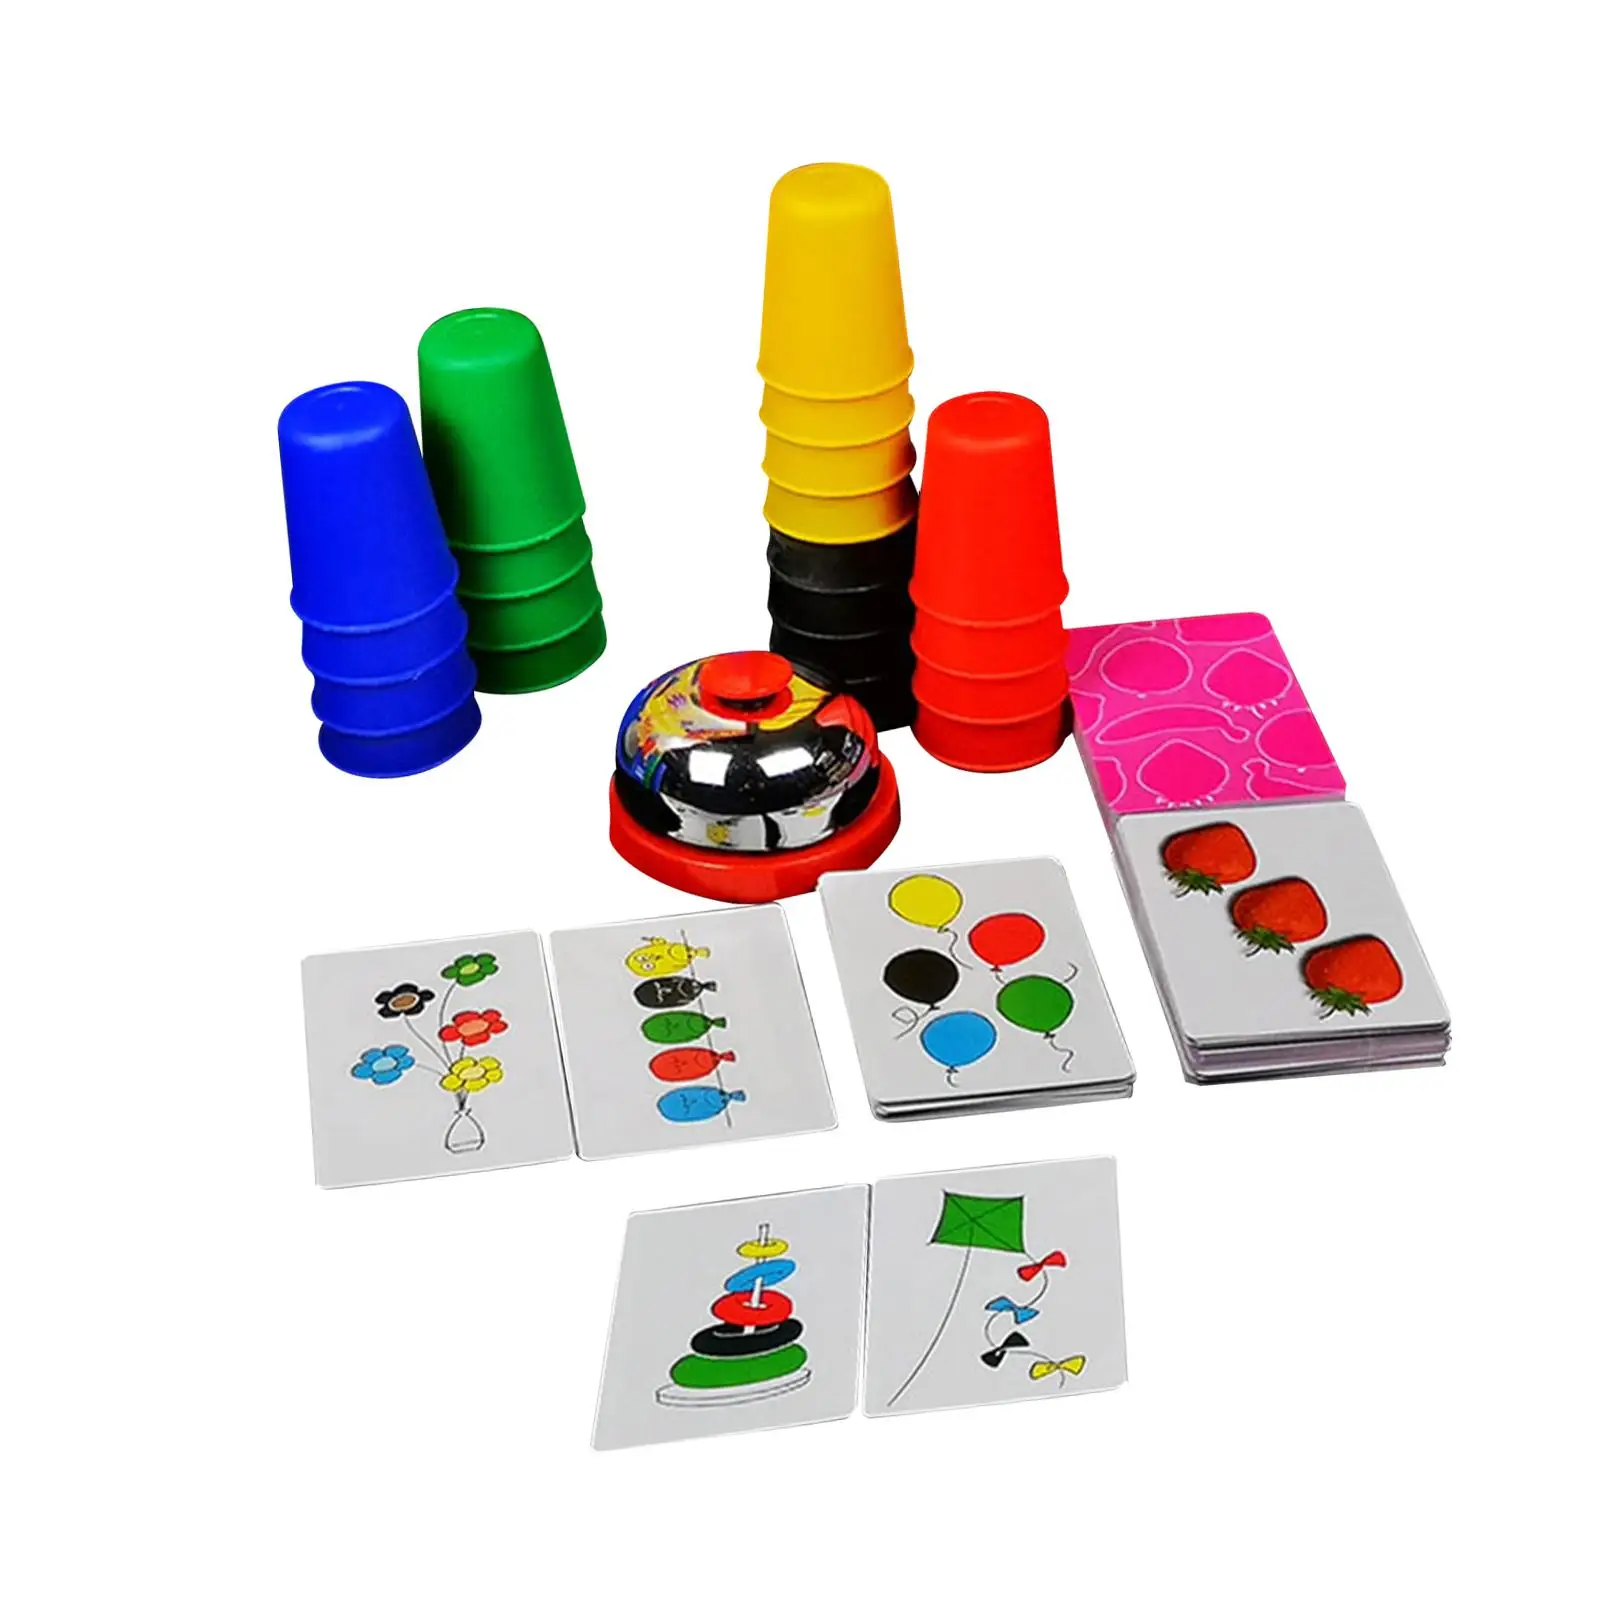 Speed Stacking Cups Set with Picture Cards Funny Quick Cup Games Stacking Cups Games for Adults Boys Girls Children Teens